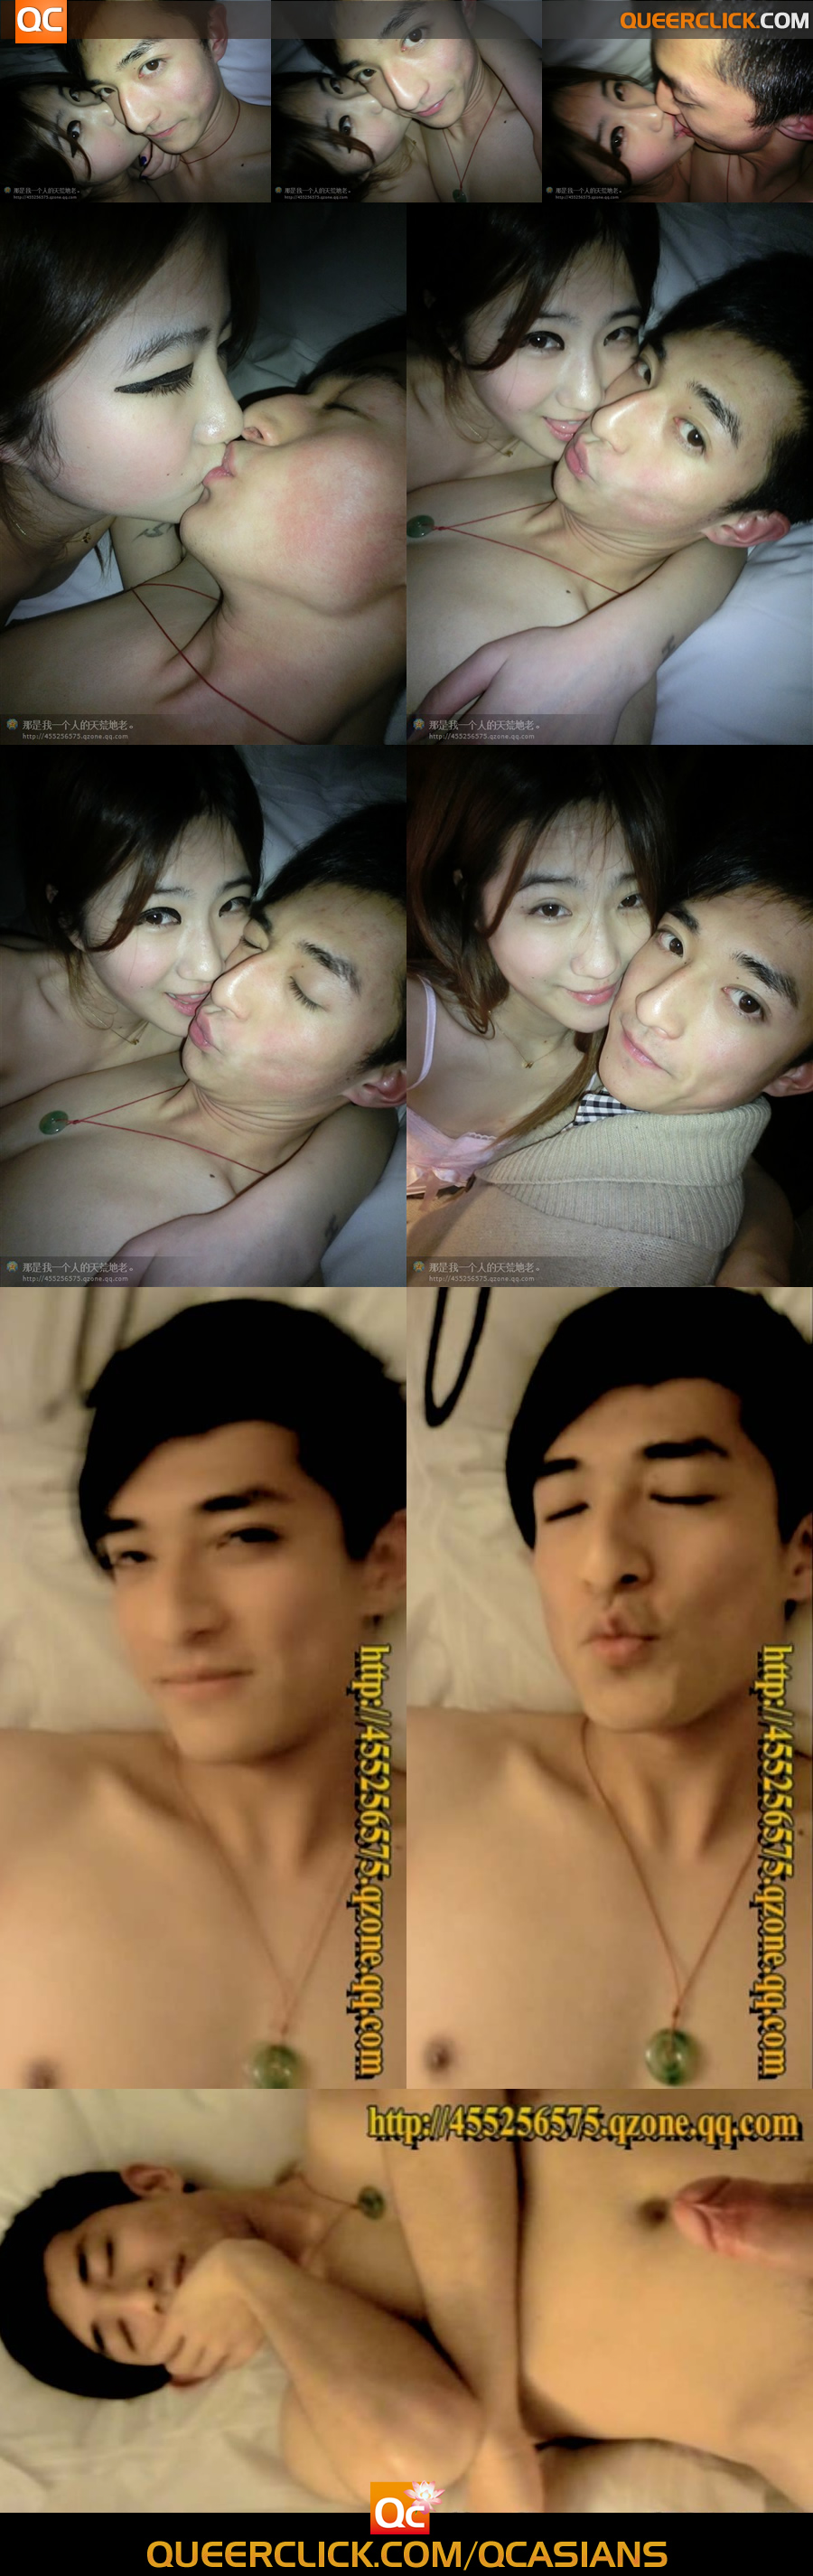 Leaked Asian Sex - Video] Straight Asian Couple Sex Tape Leaked - QueerClick